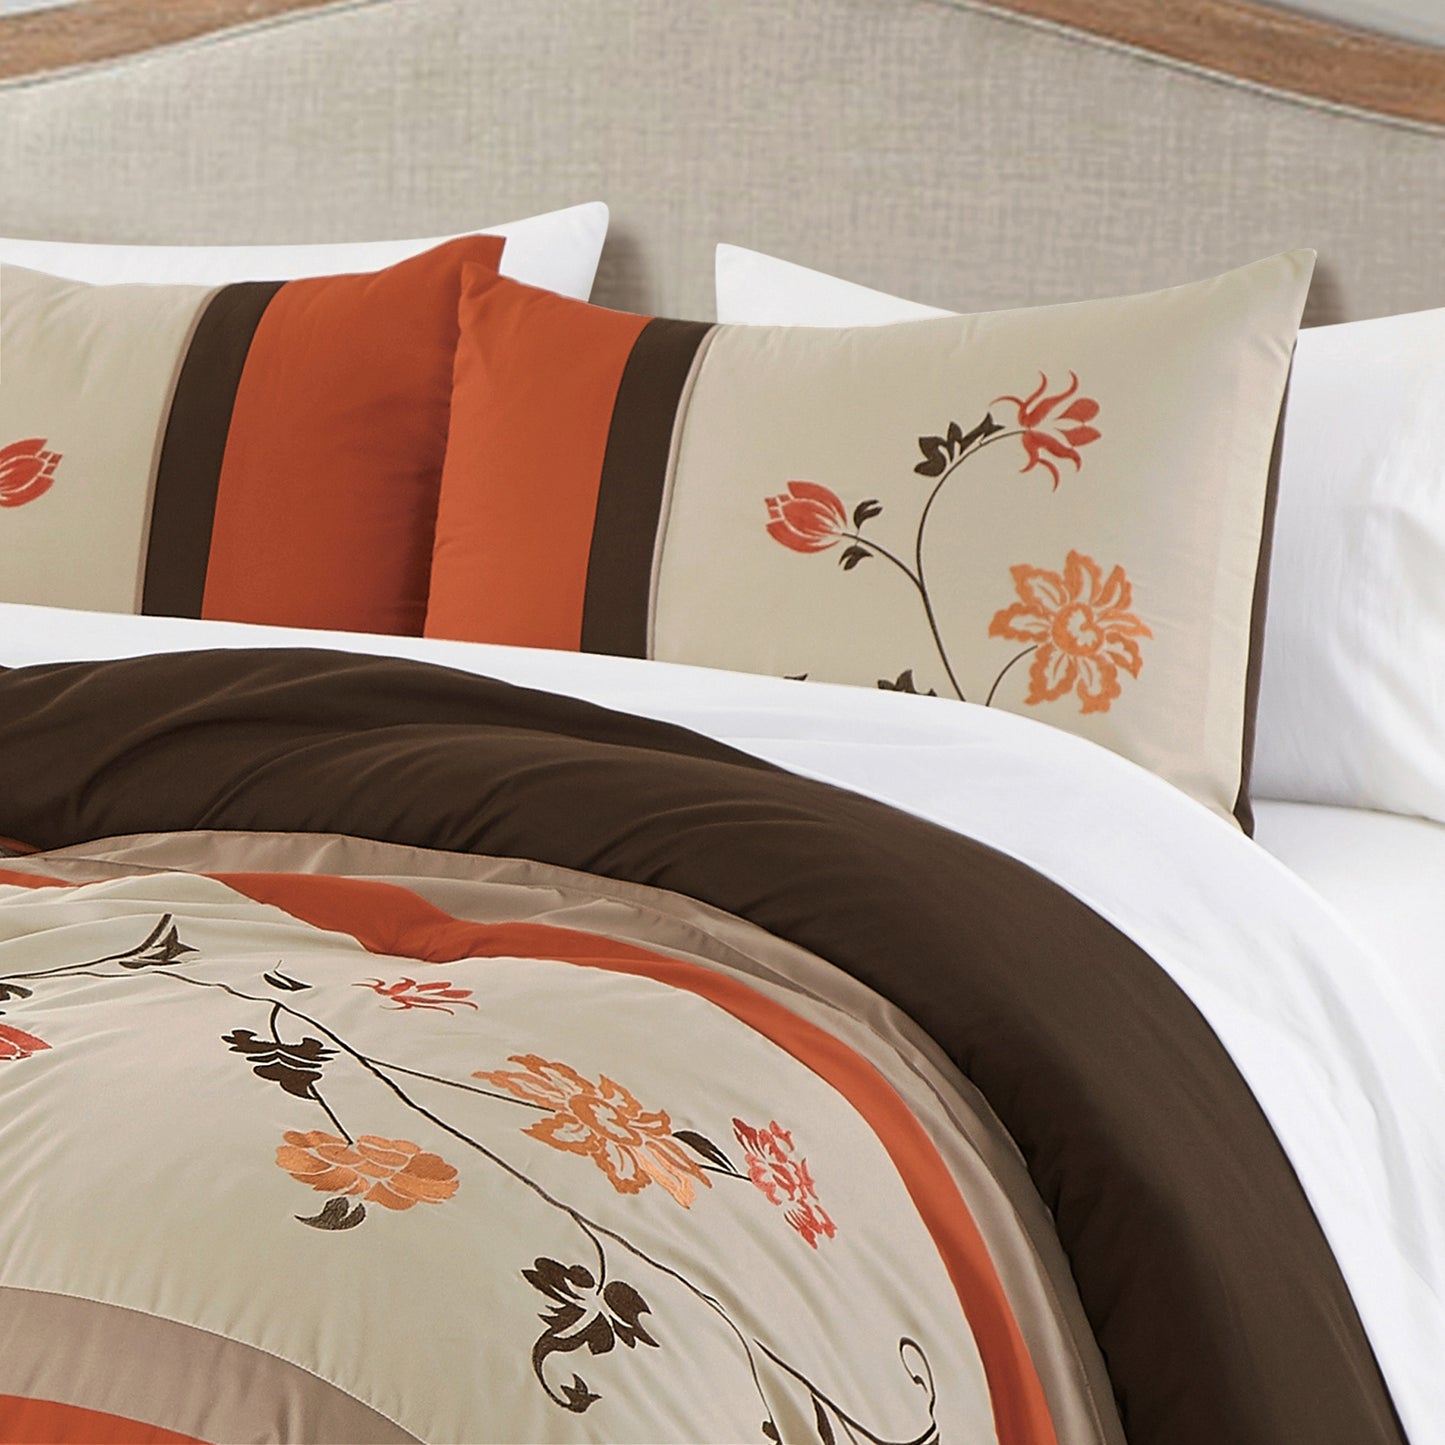 Daphne 7-Piece Autumn Floral Embroidery Bed in a Bag Comforter Set